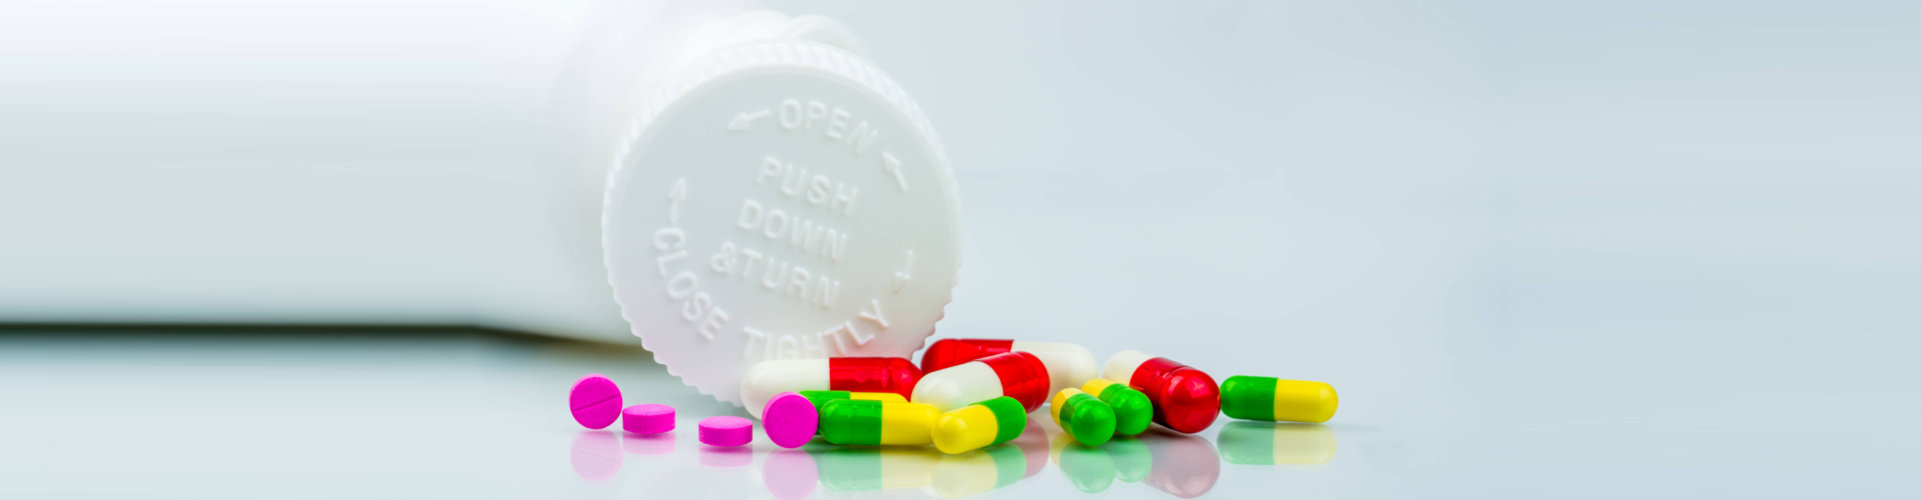 pills outside the container